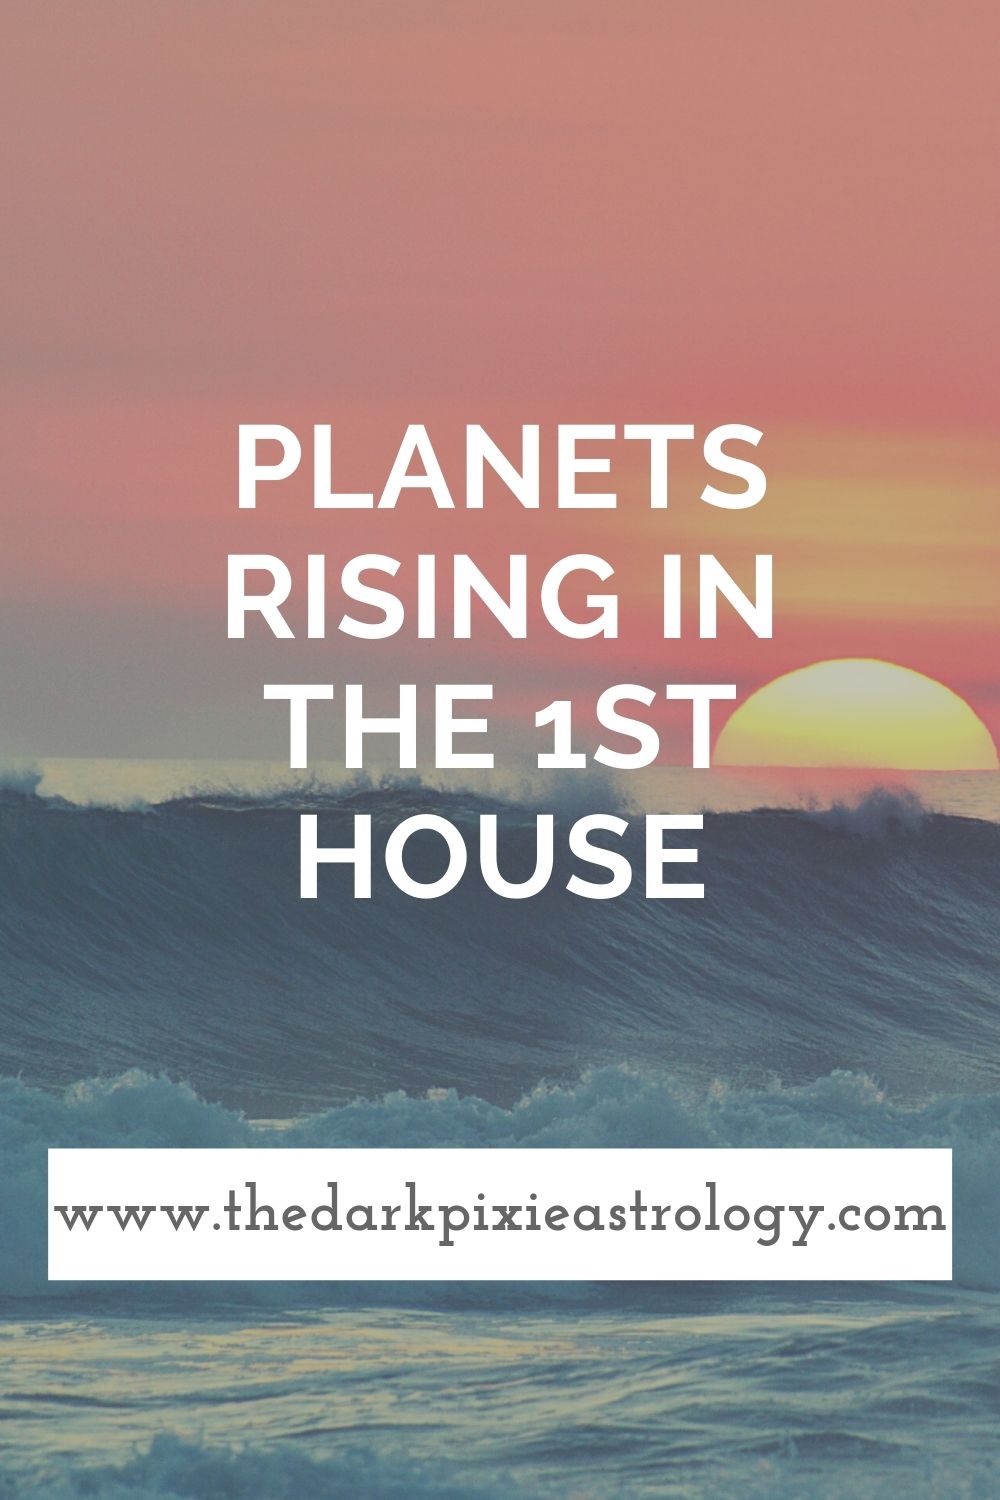 Planets Rising in the 1st House - The Dark Pixie Astrology